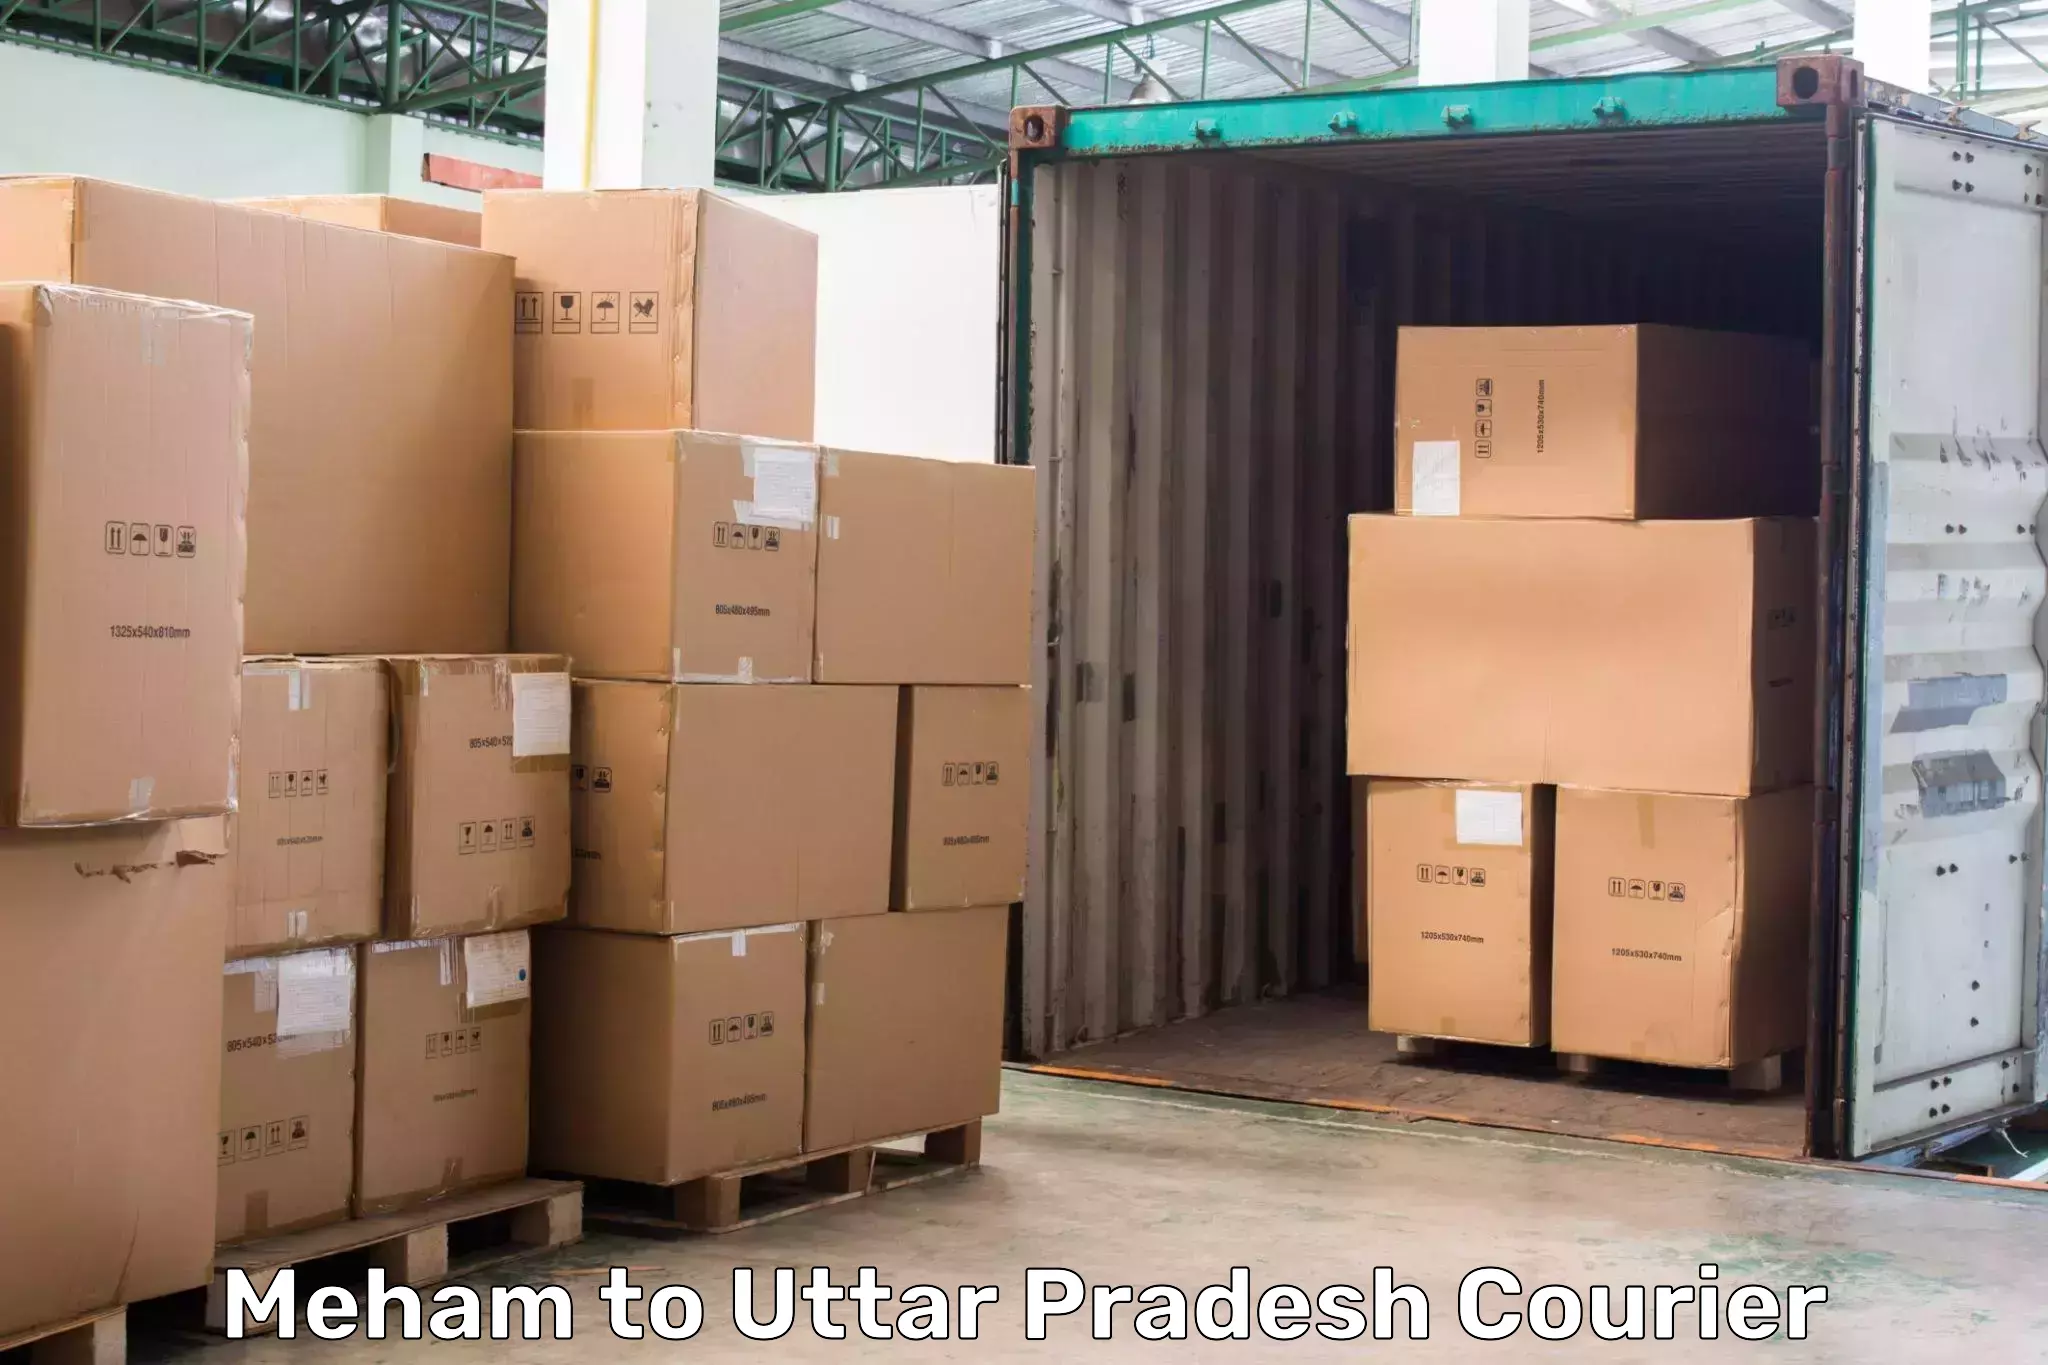 Express delivery network Meham to Sambhal